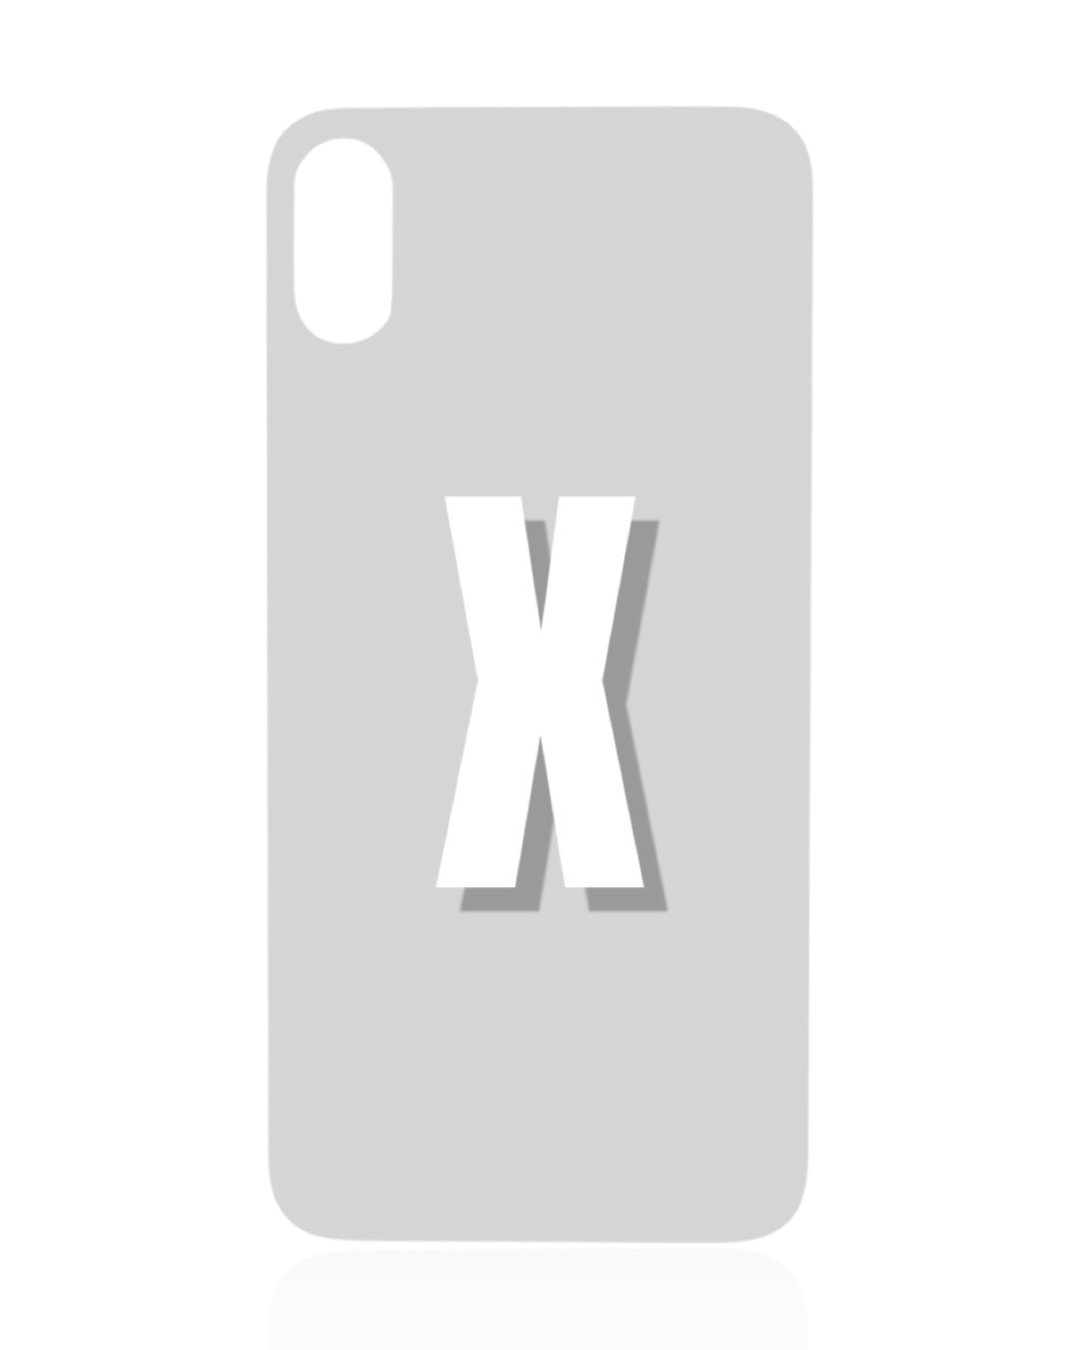 For iPhone X Bigger Camera Hole Back Glass Replacement (All Color)